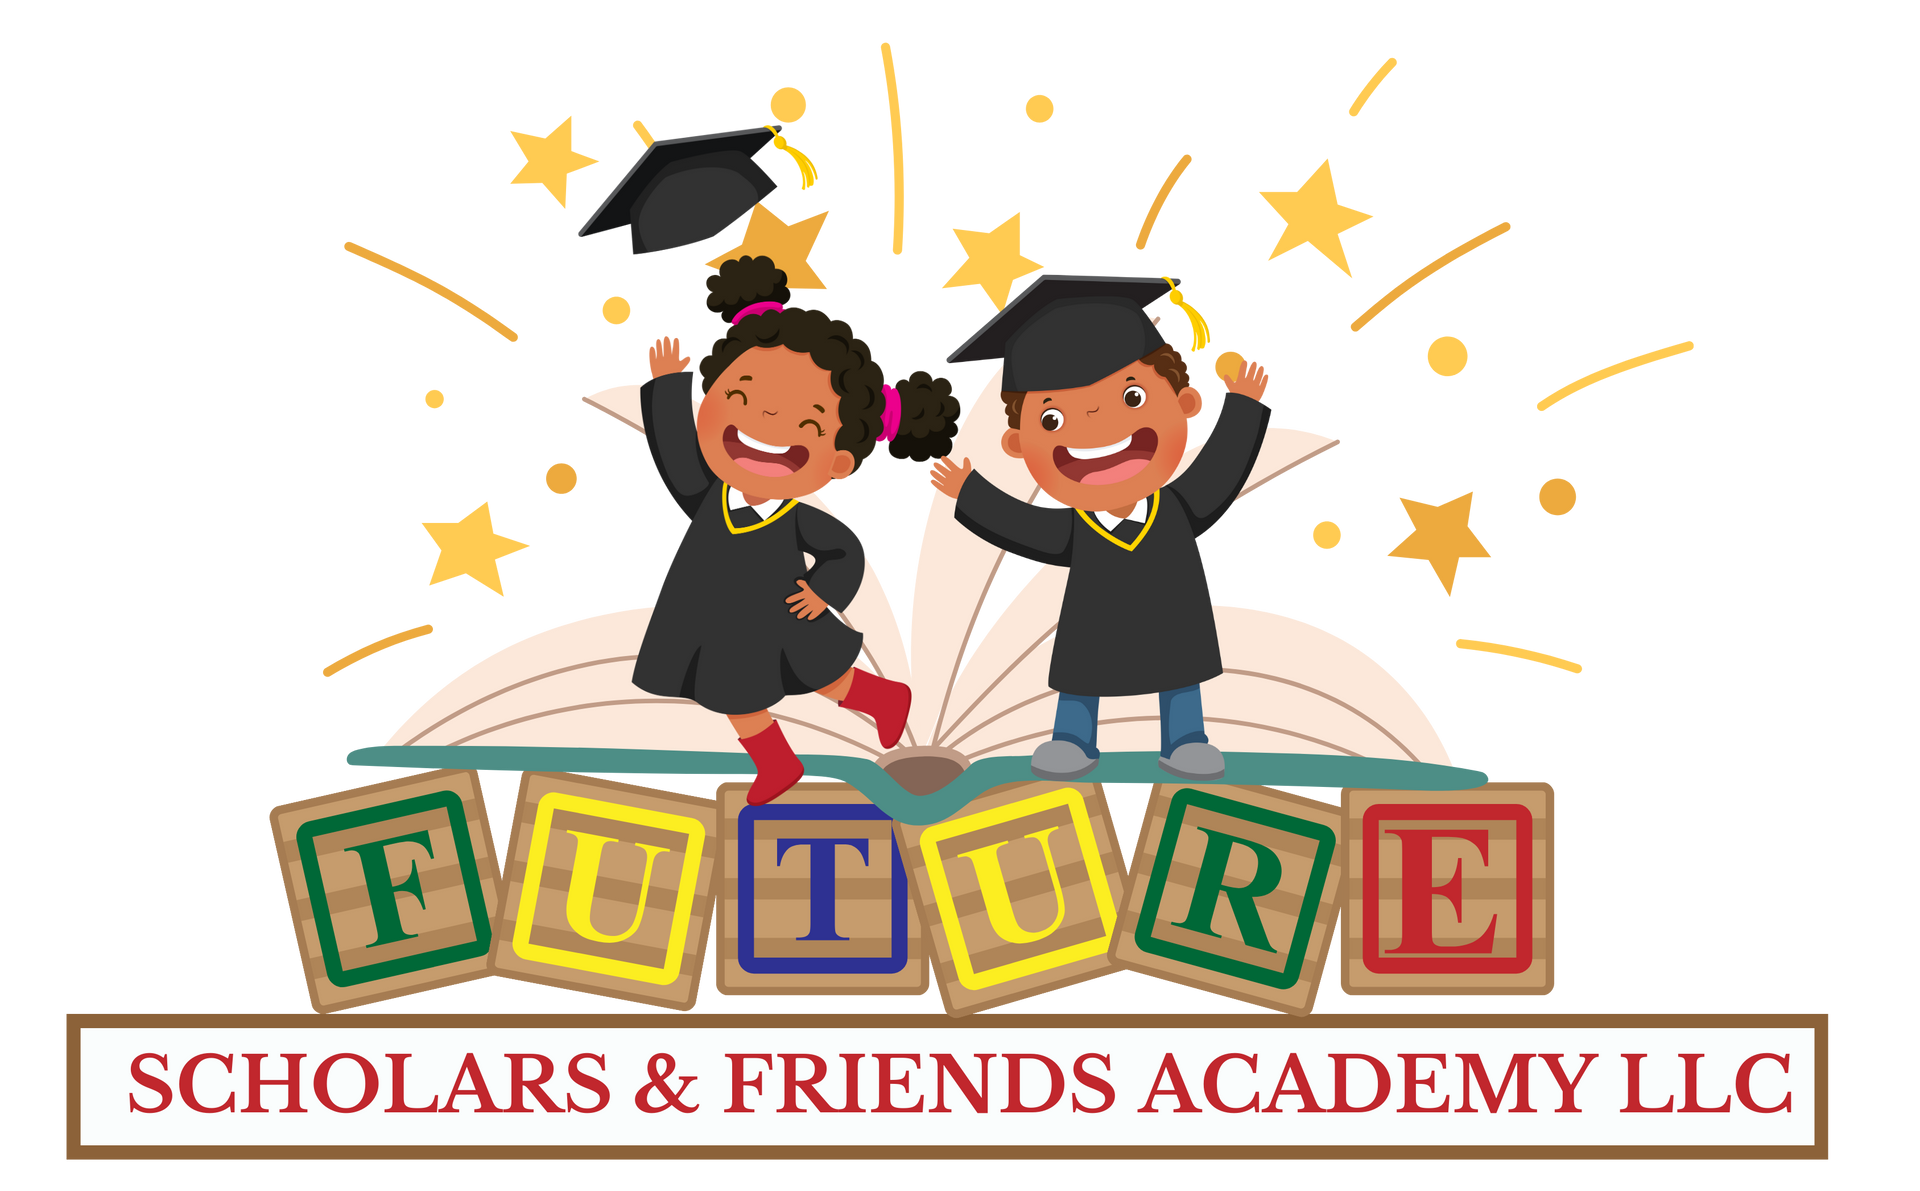 Future Scholars and Friends Academy